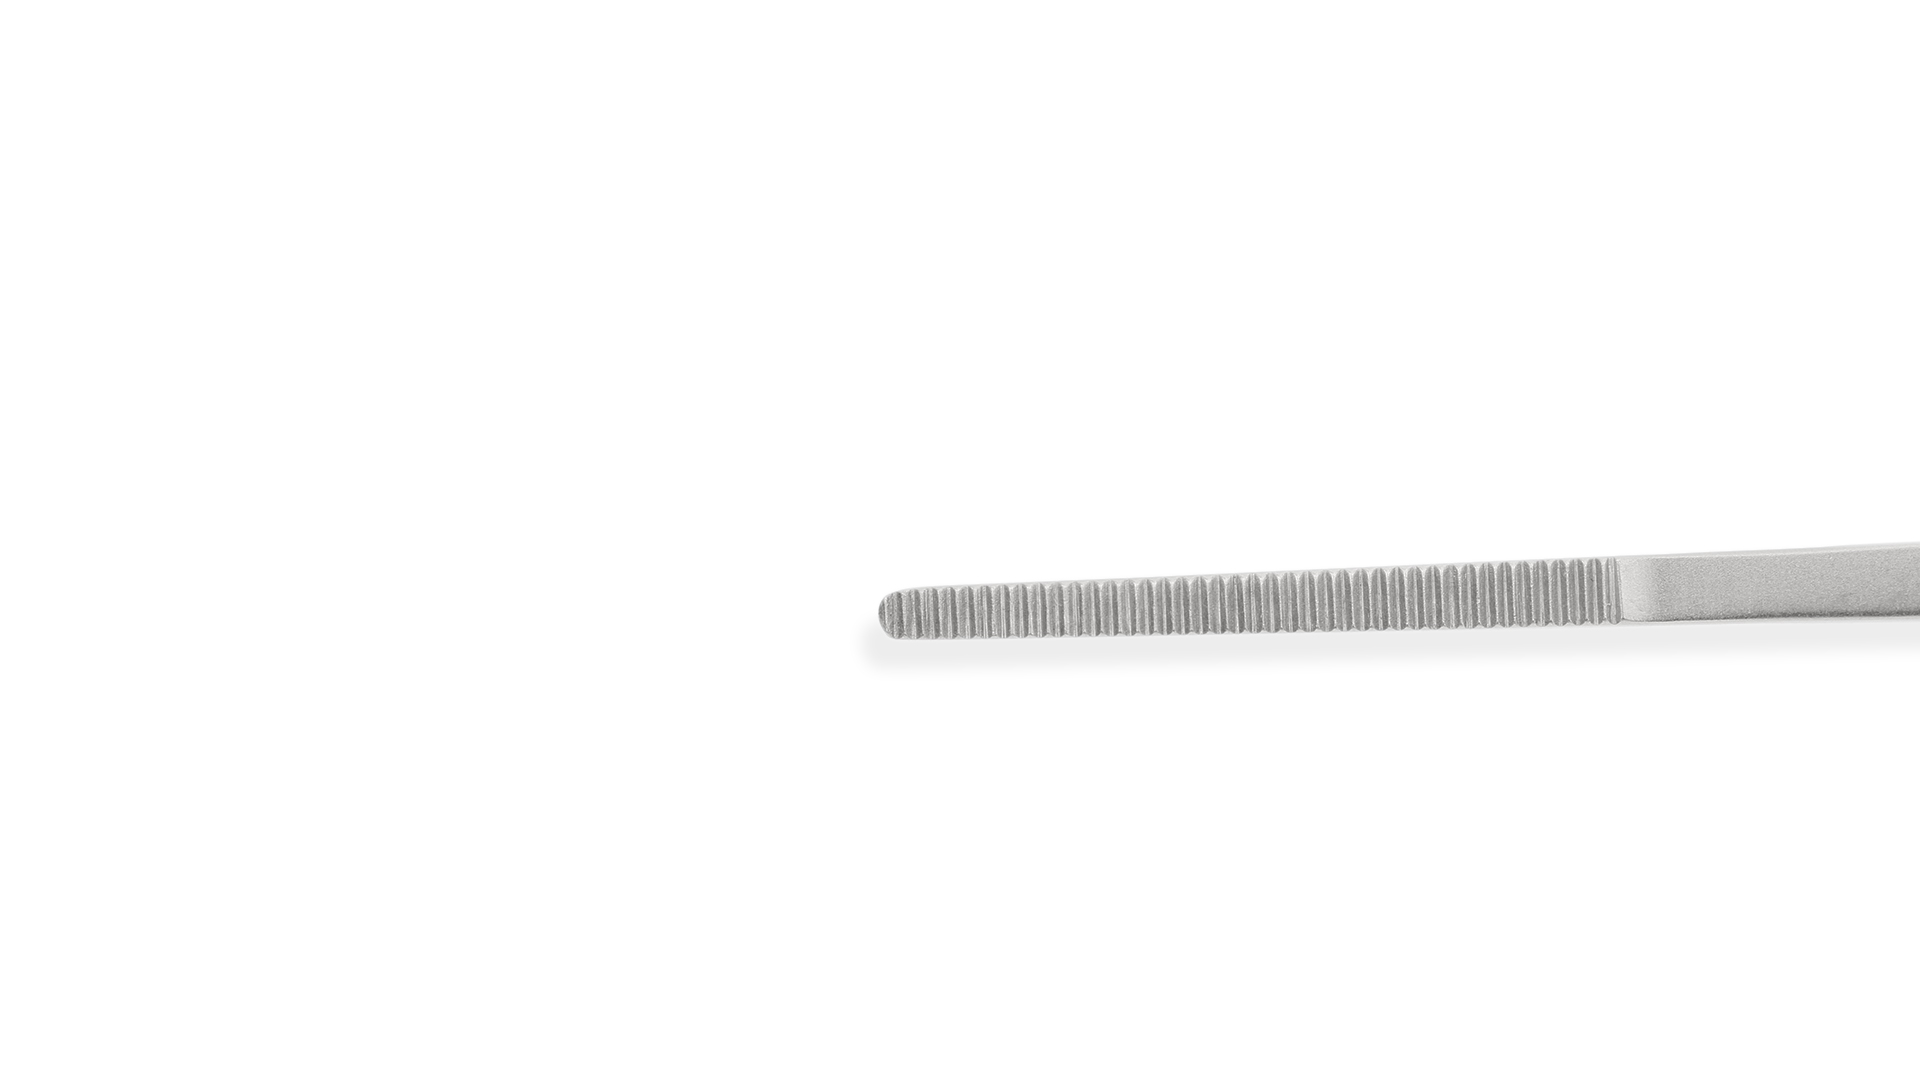 Gerald Forceps - Straight 1.5mm serrated tips